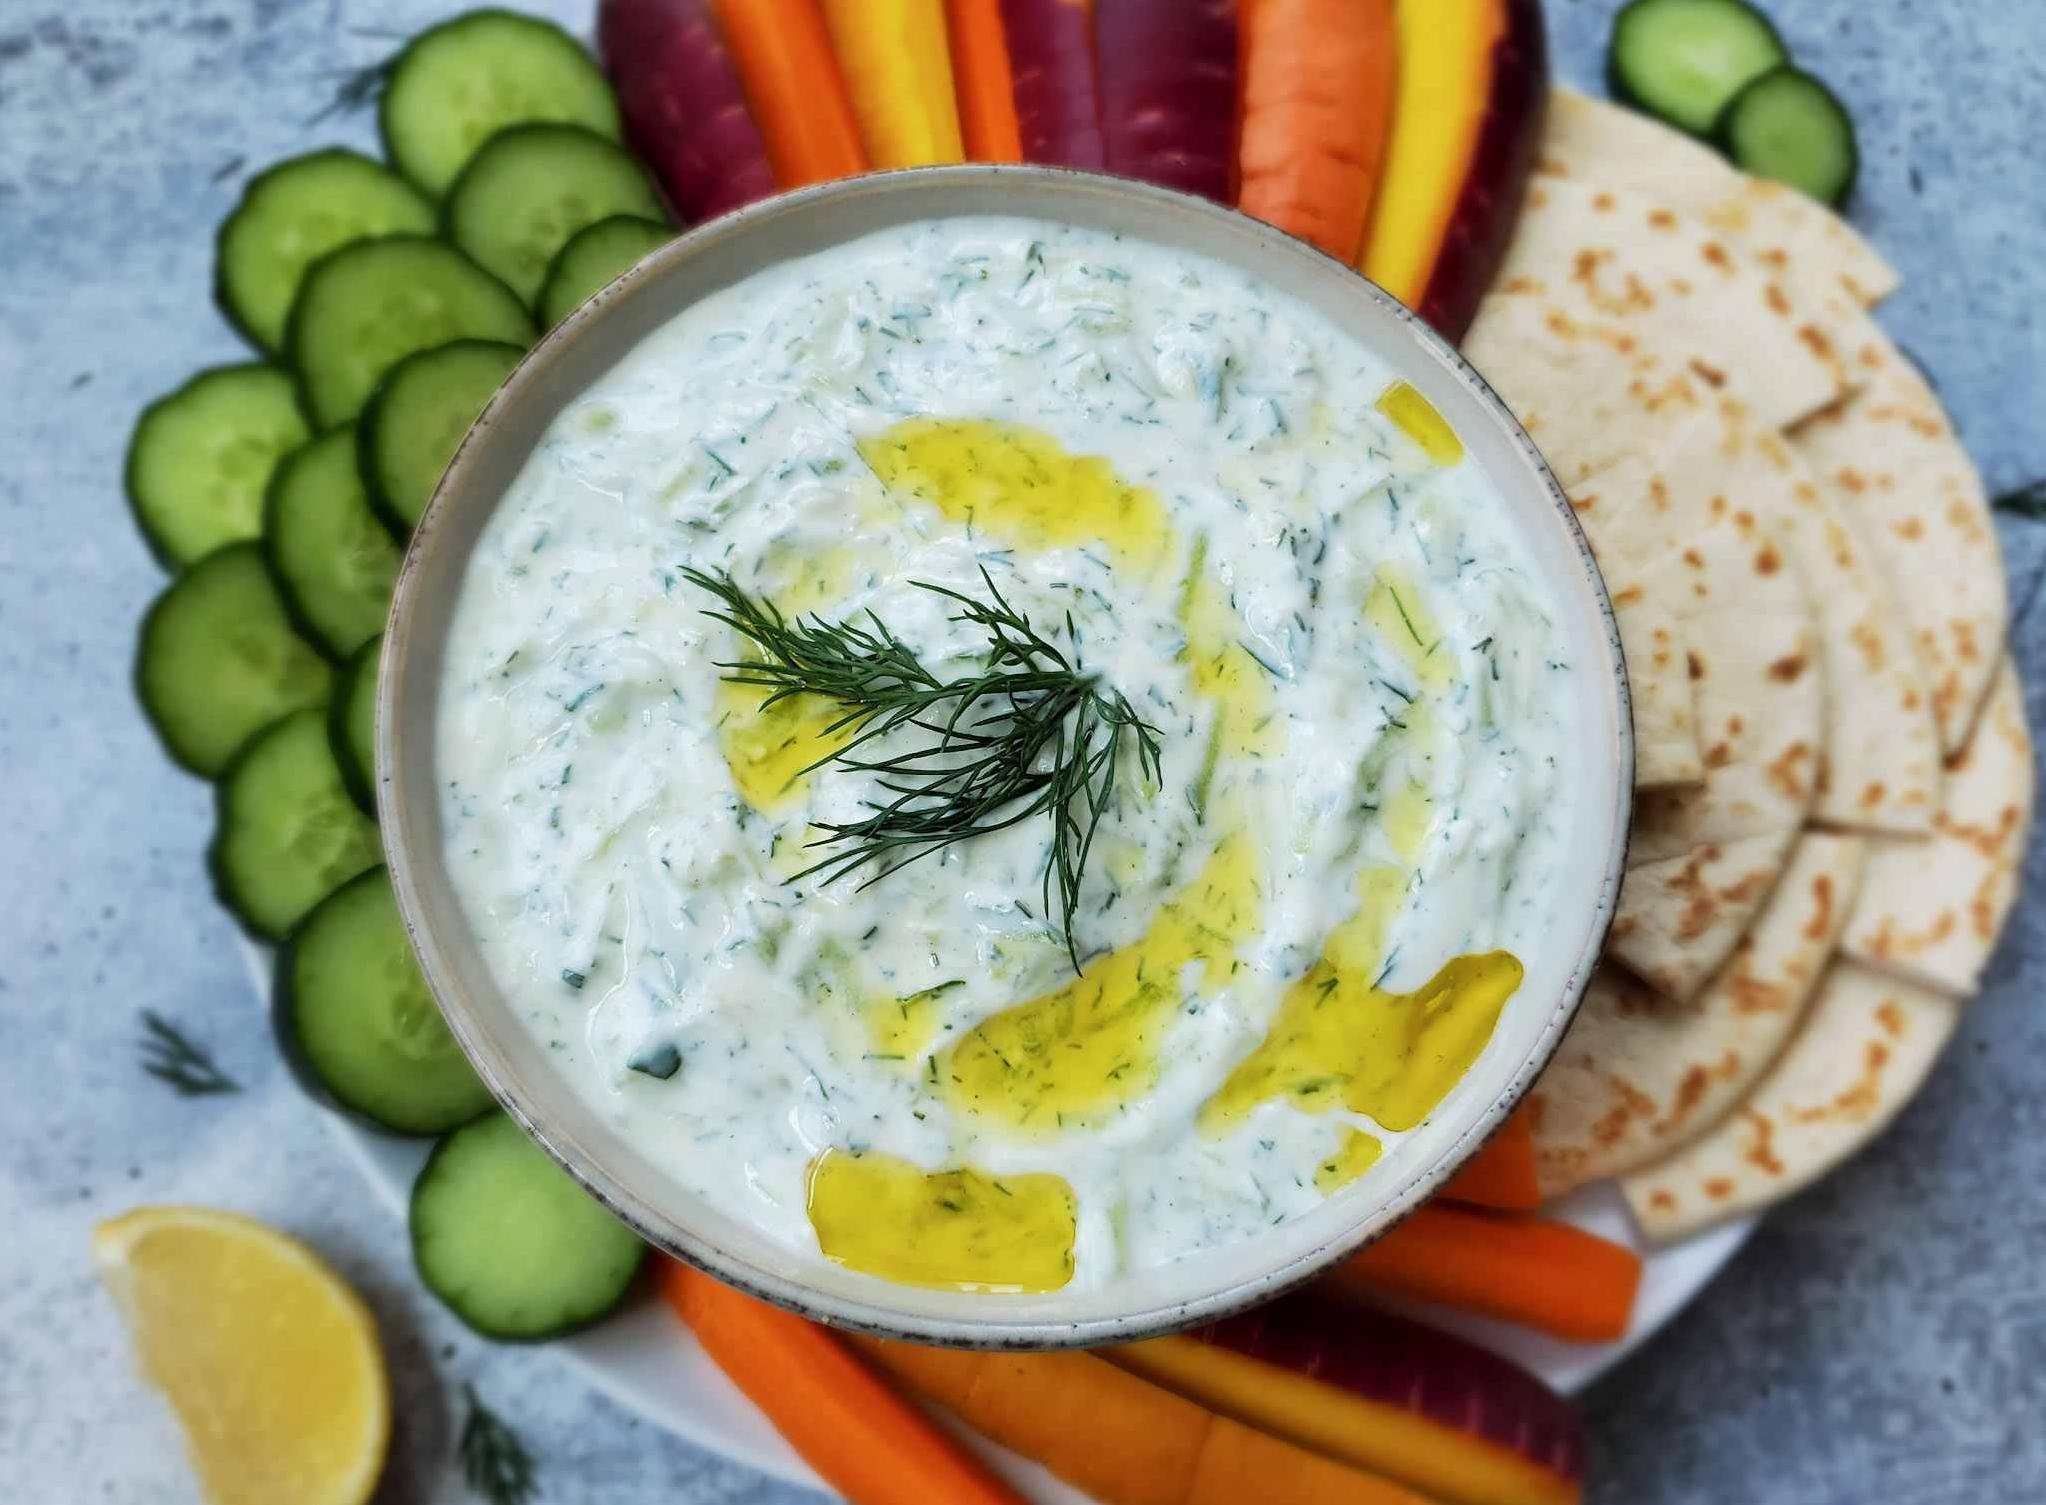  Whip up a batch of tzatziki sauce in minutes with this recipe.